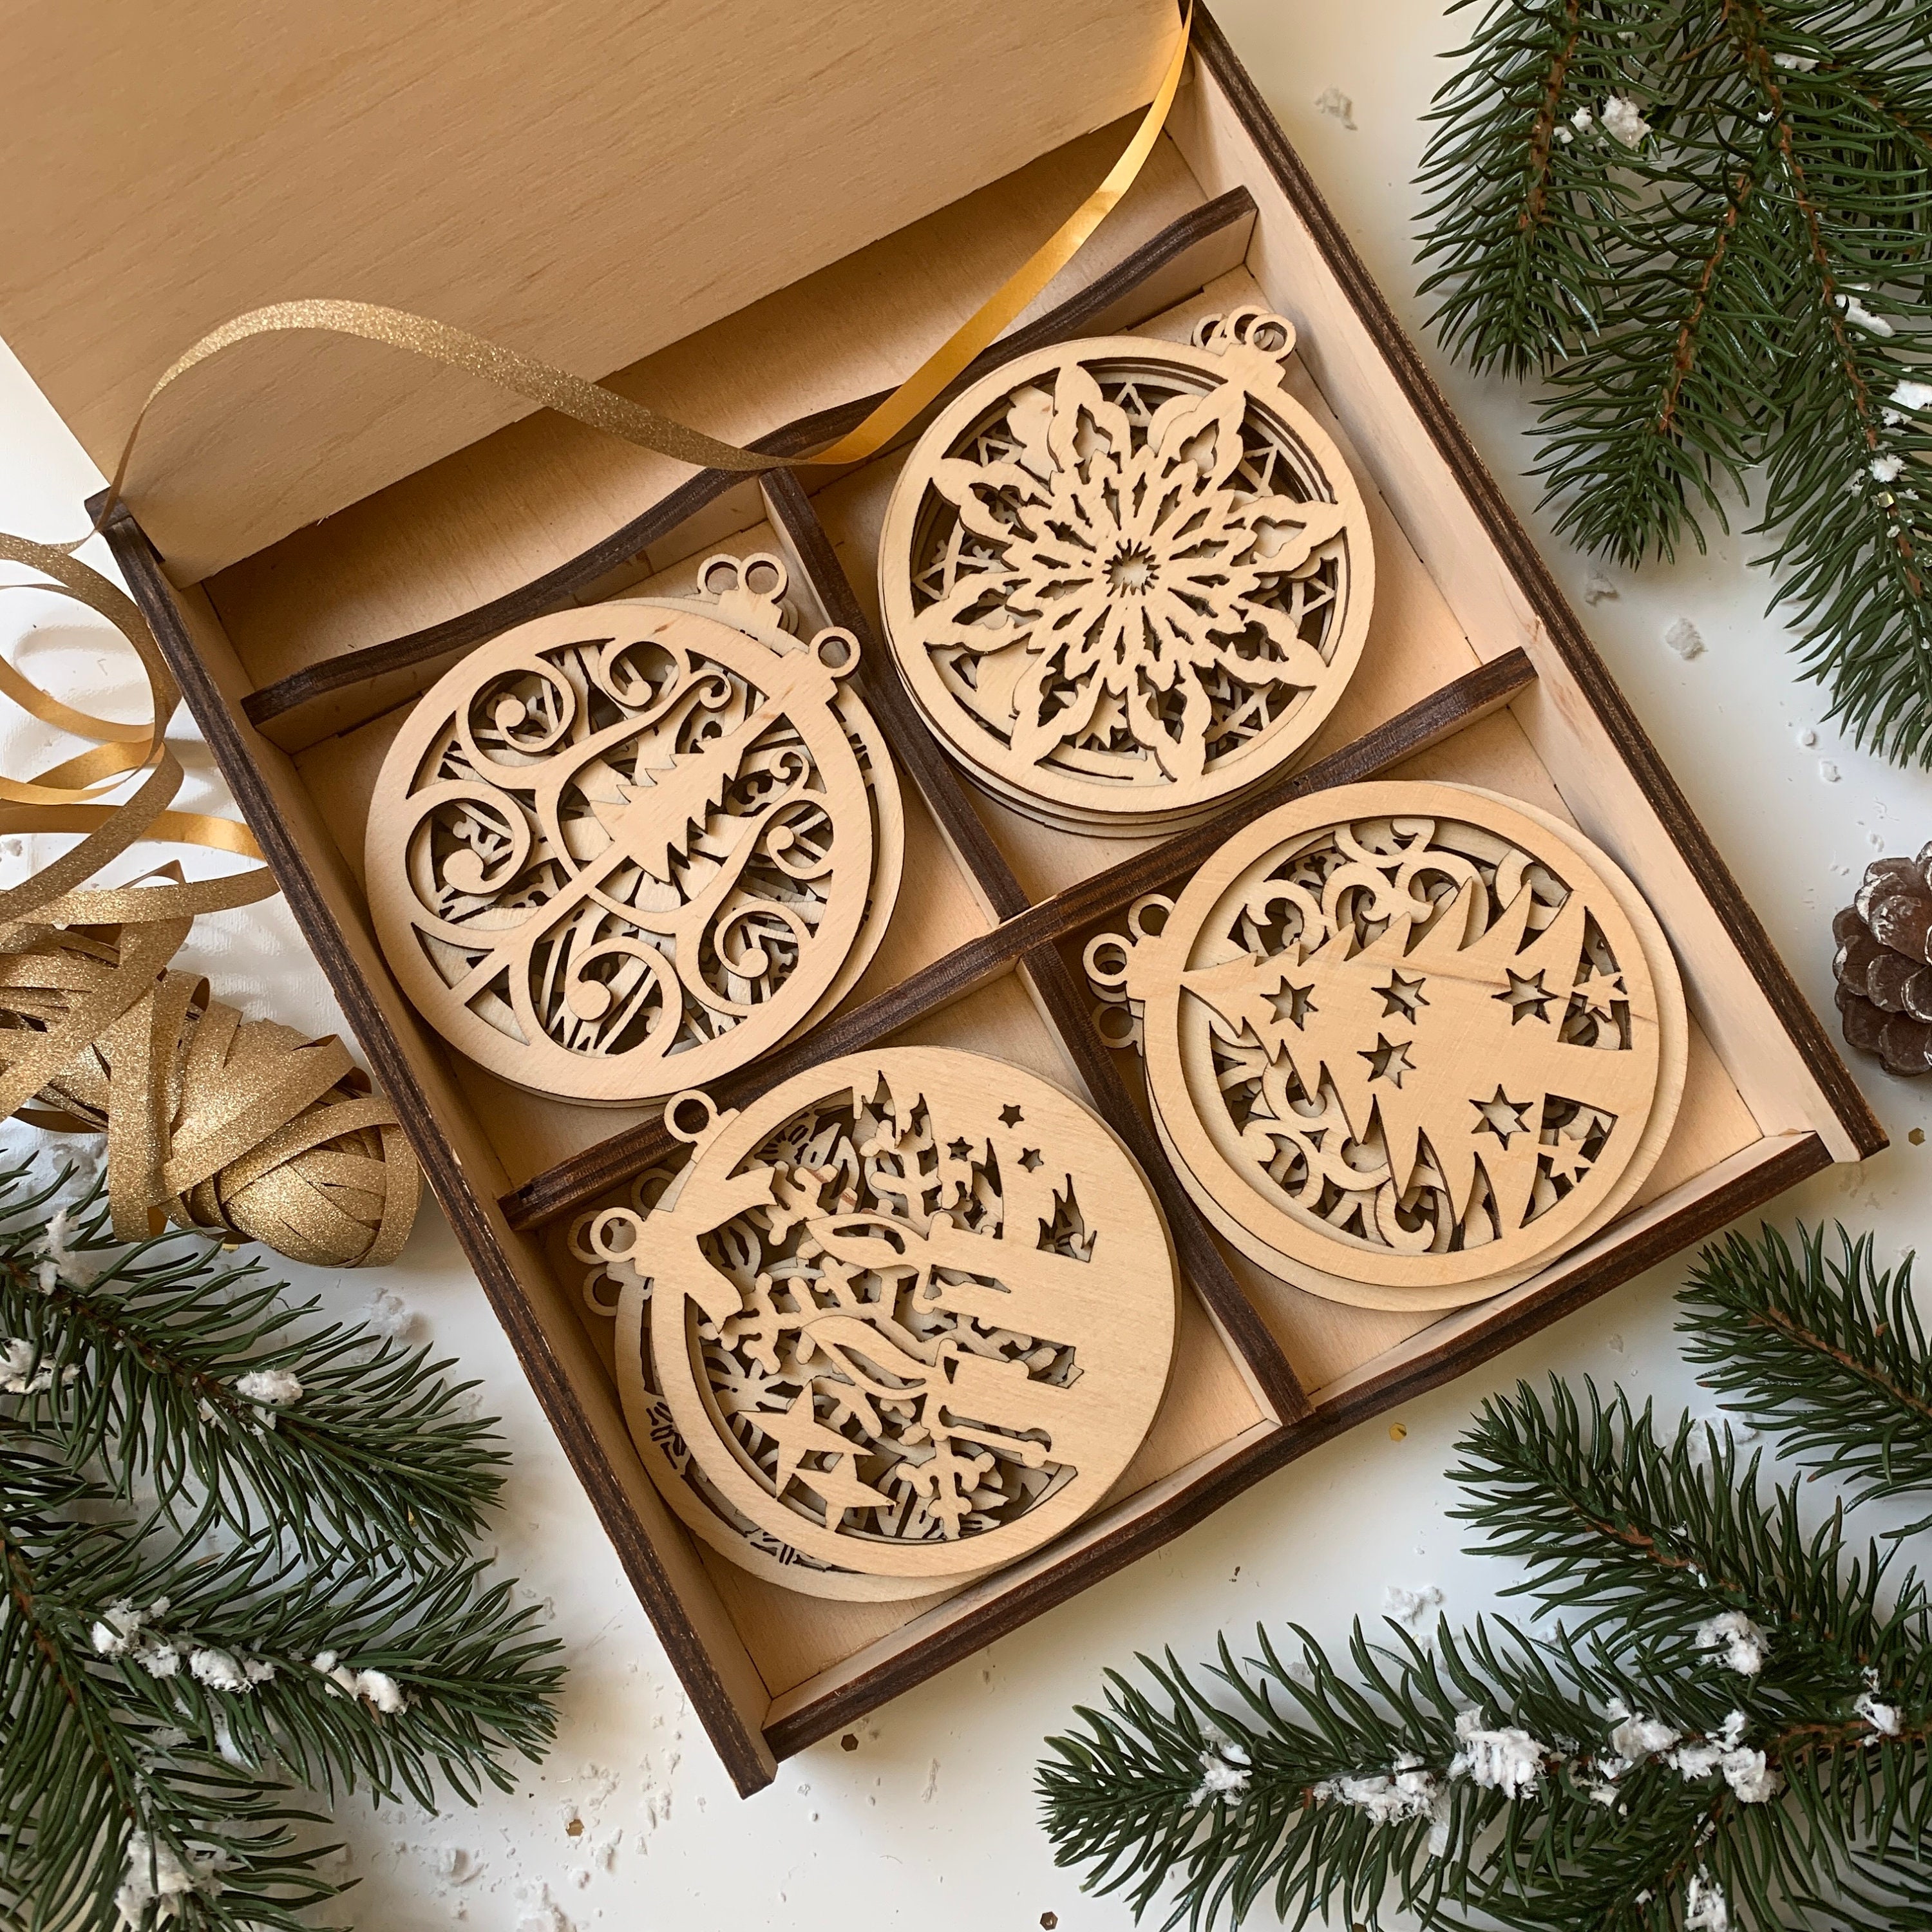 20pcs Wooden Snowflake ornaments wood snowflakes for crafts